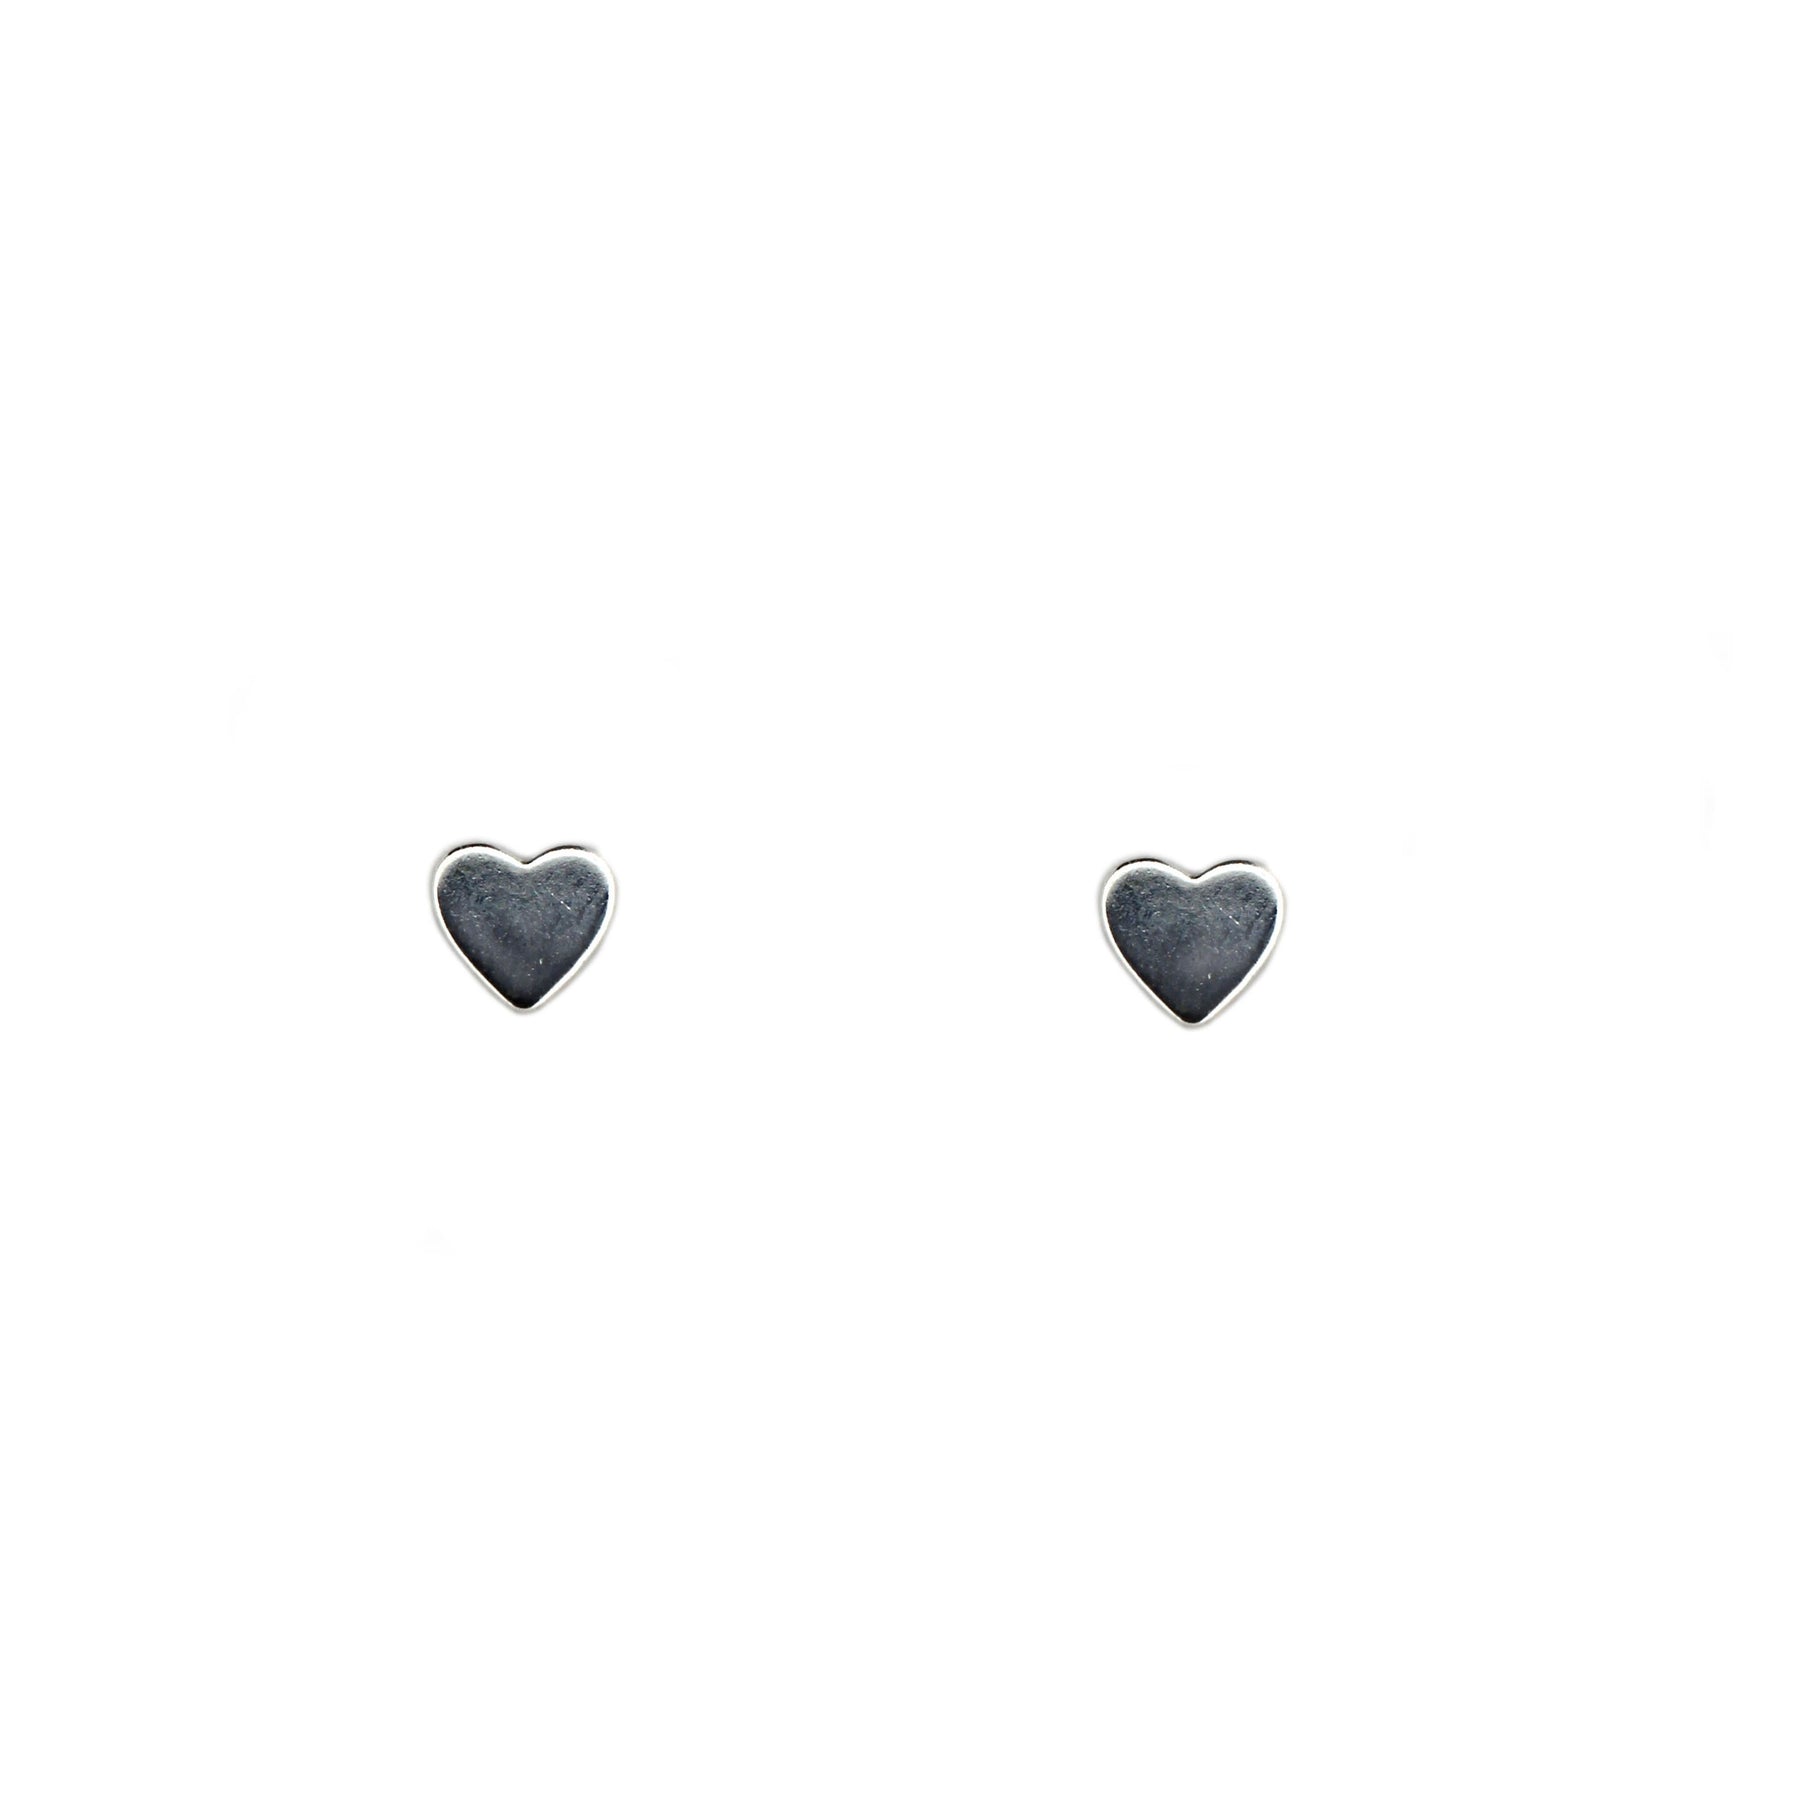 Tiny Heart Shaped Huggies Wrap Earrings: 18K Gold Filled or Rhodium